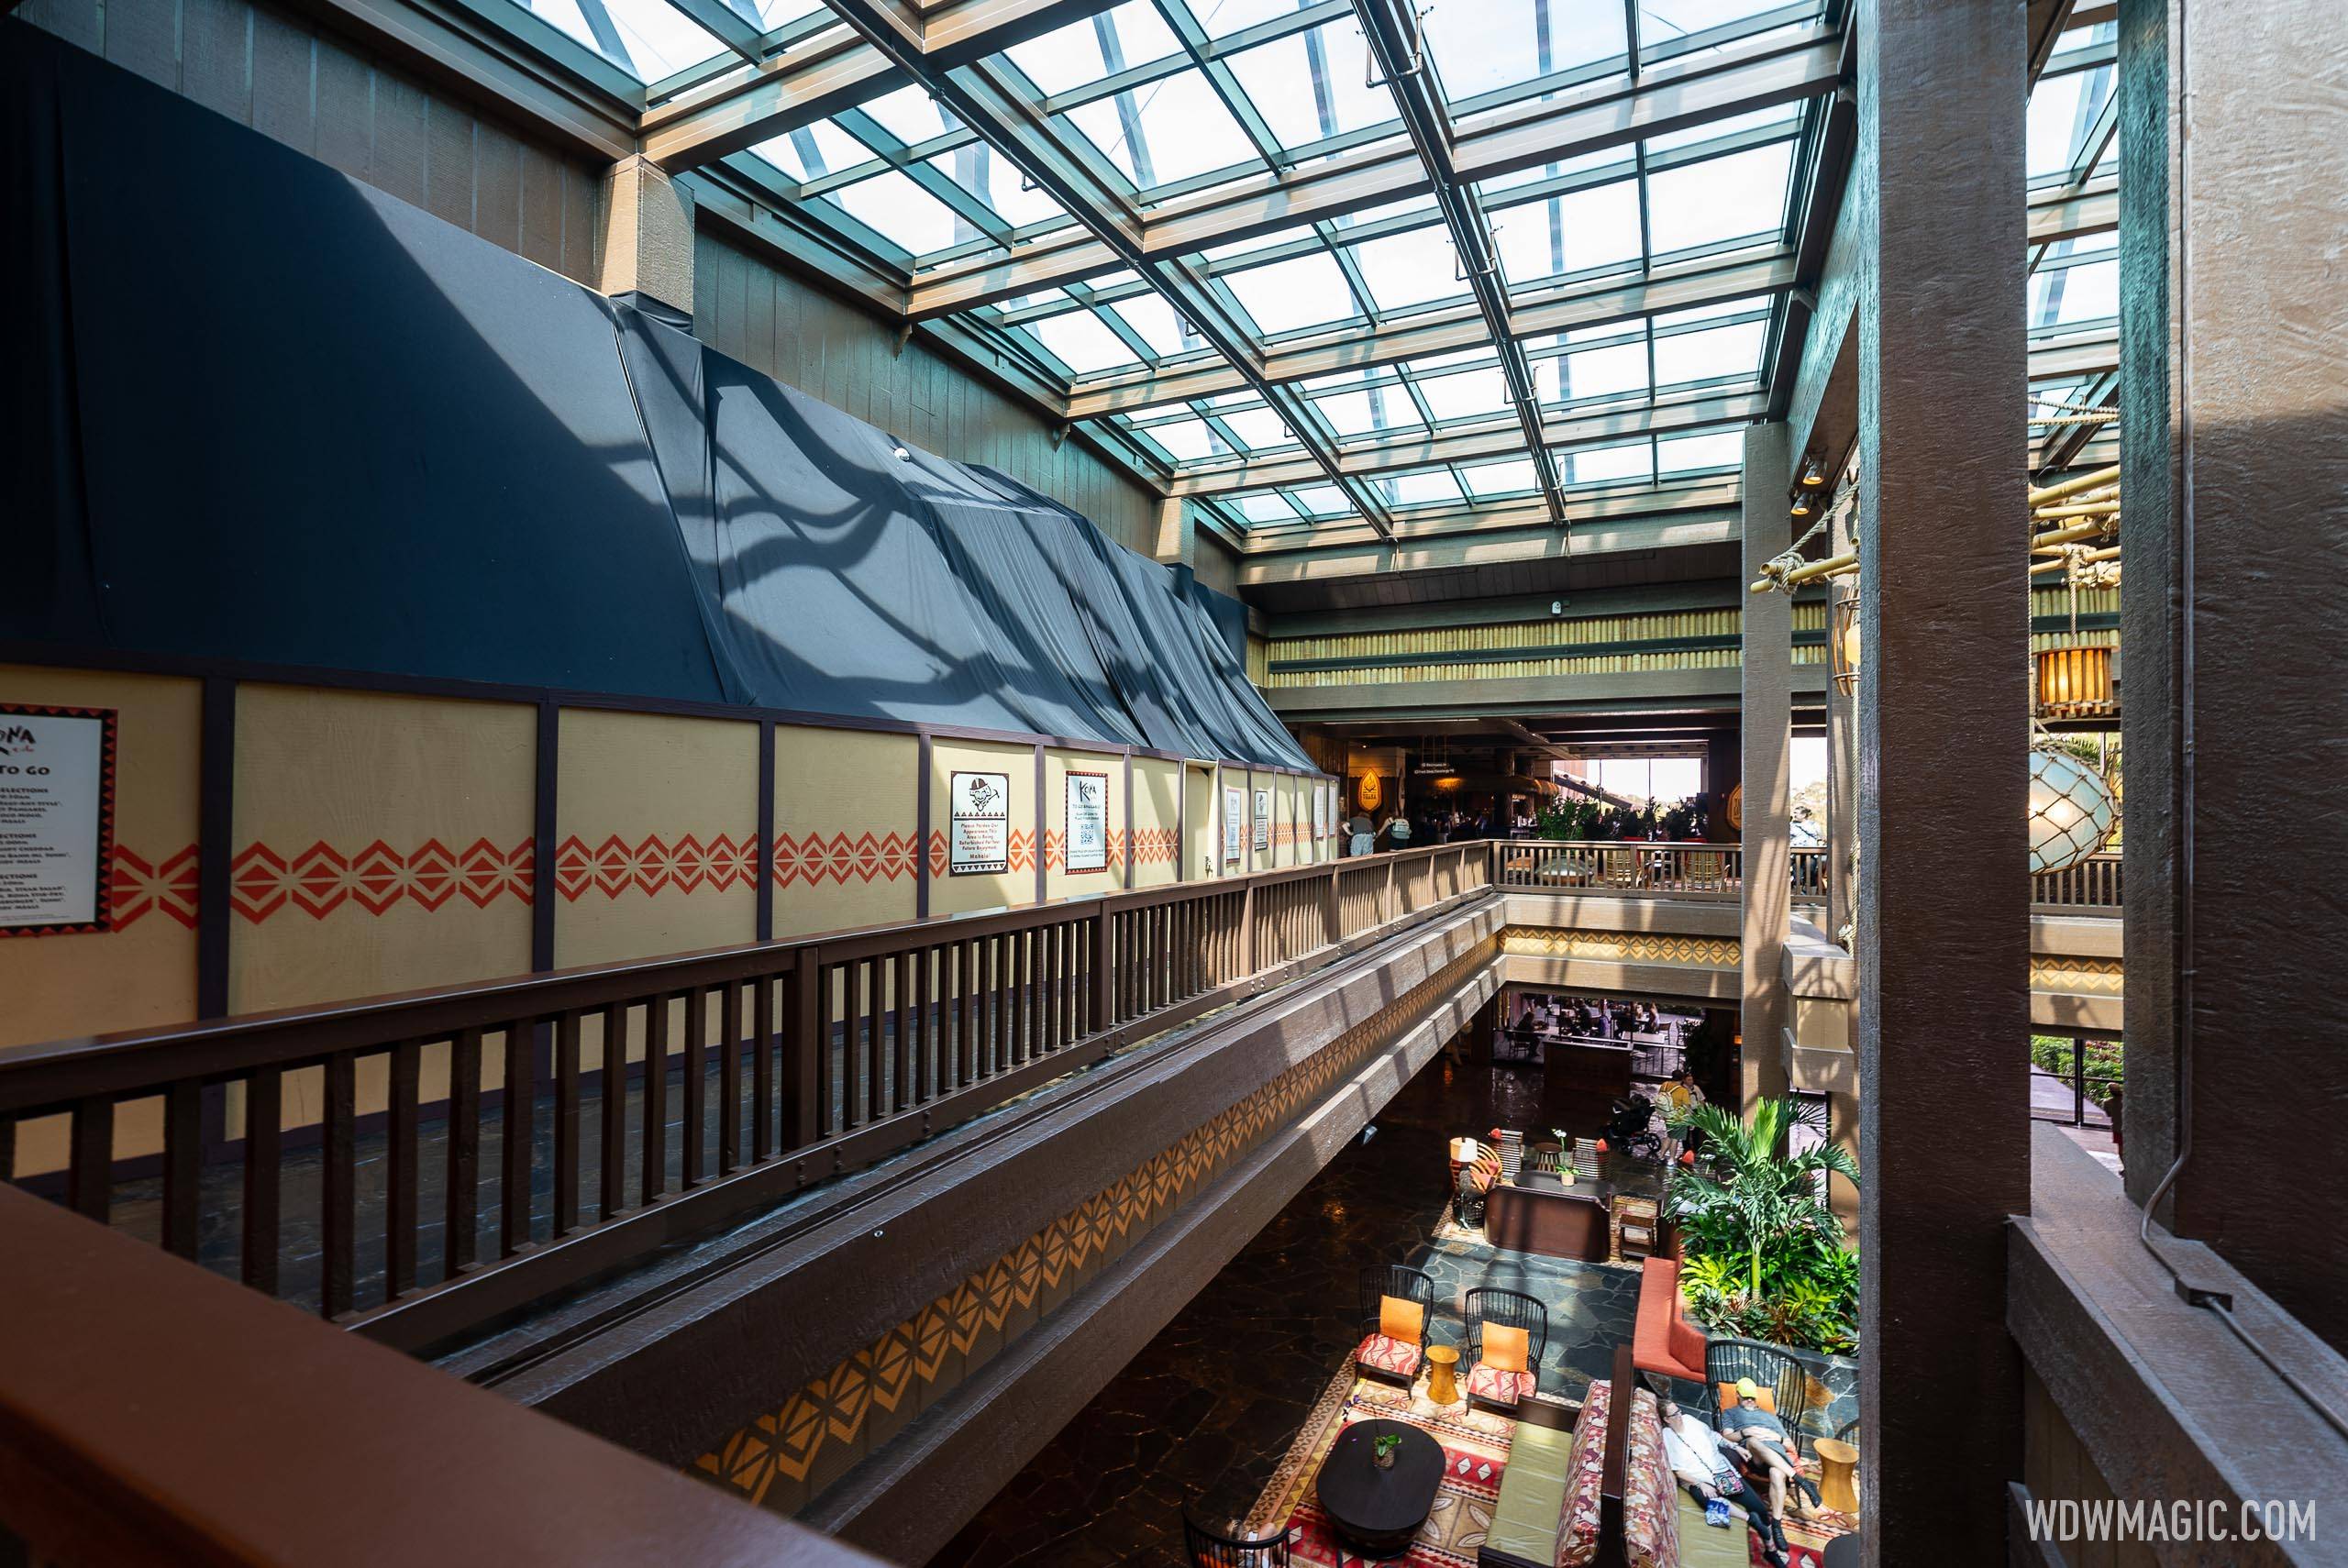 Reservations open for the refurbished Kona Cafe at Disney's Polynesian Village Resort